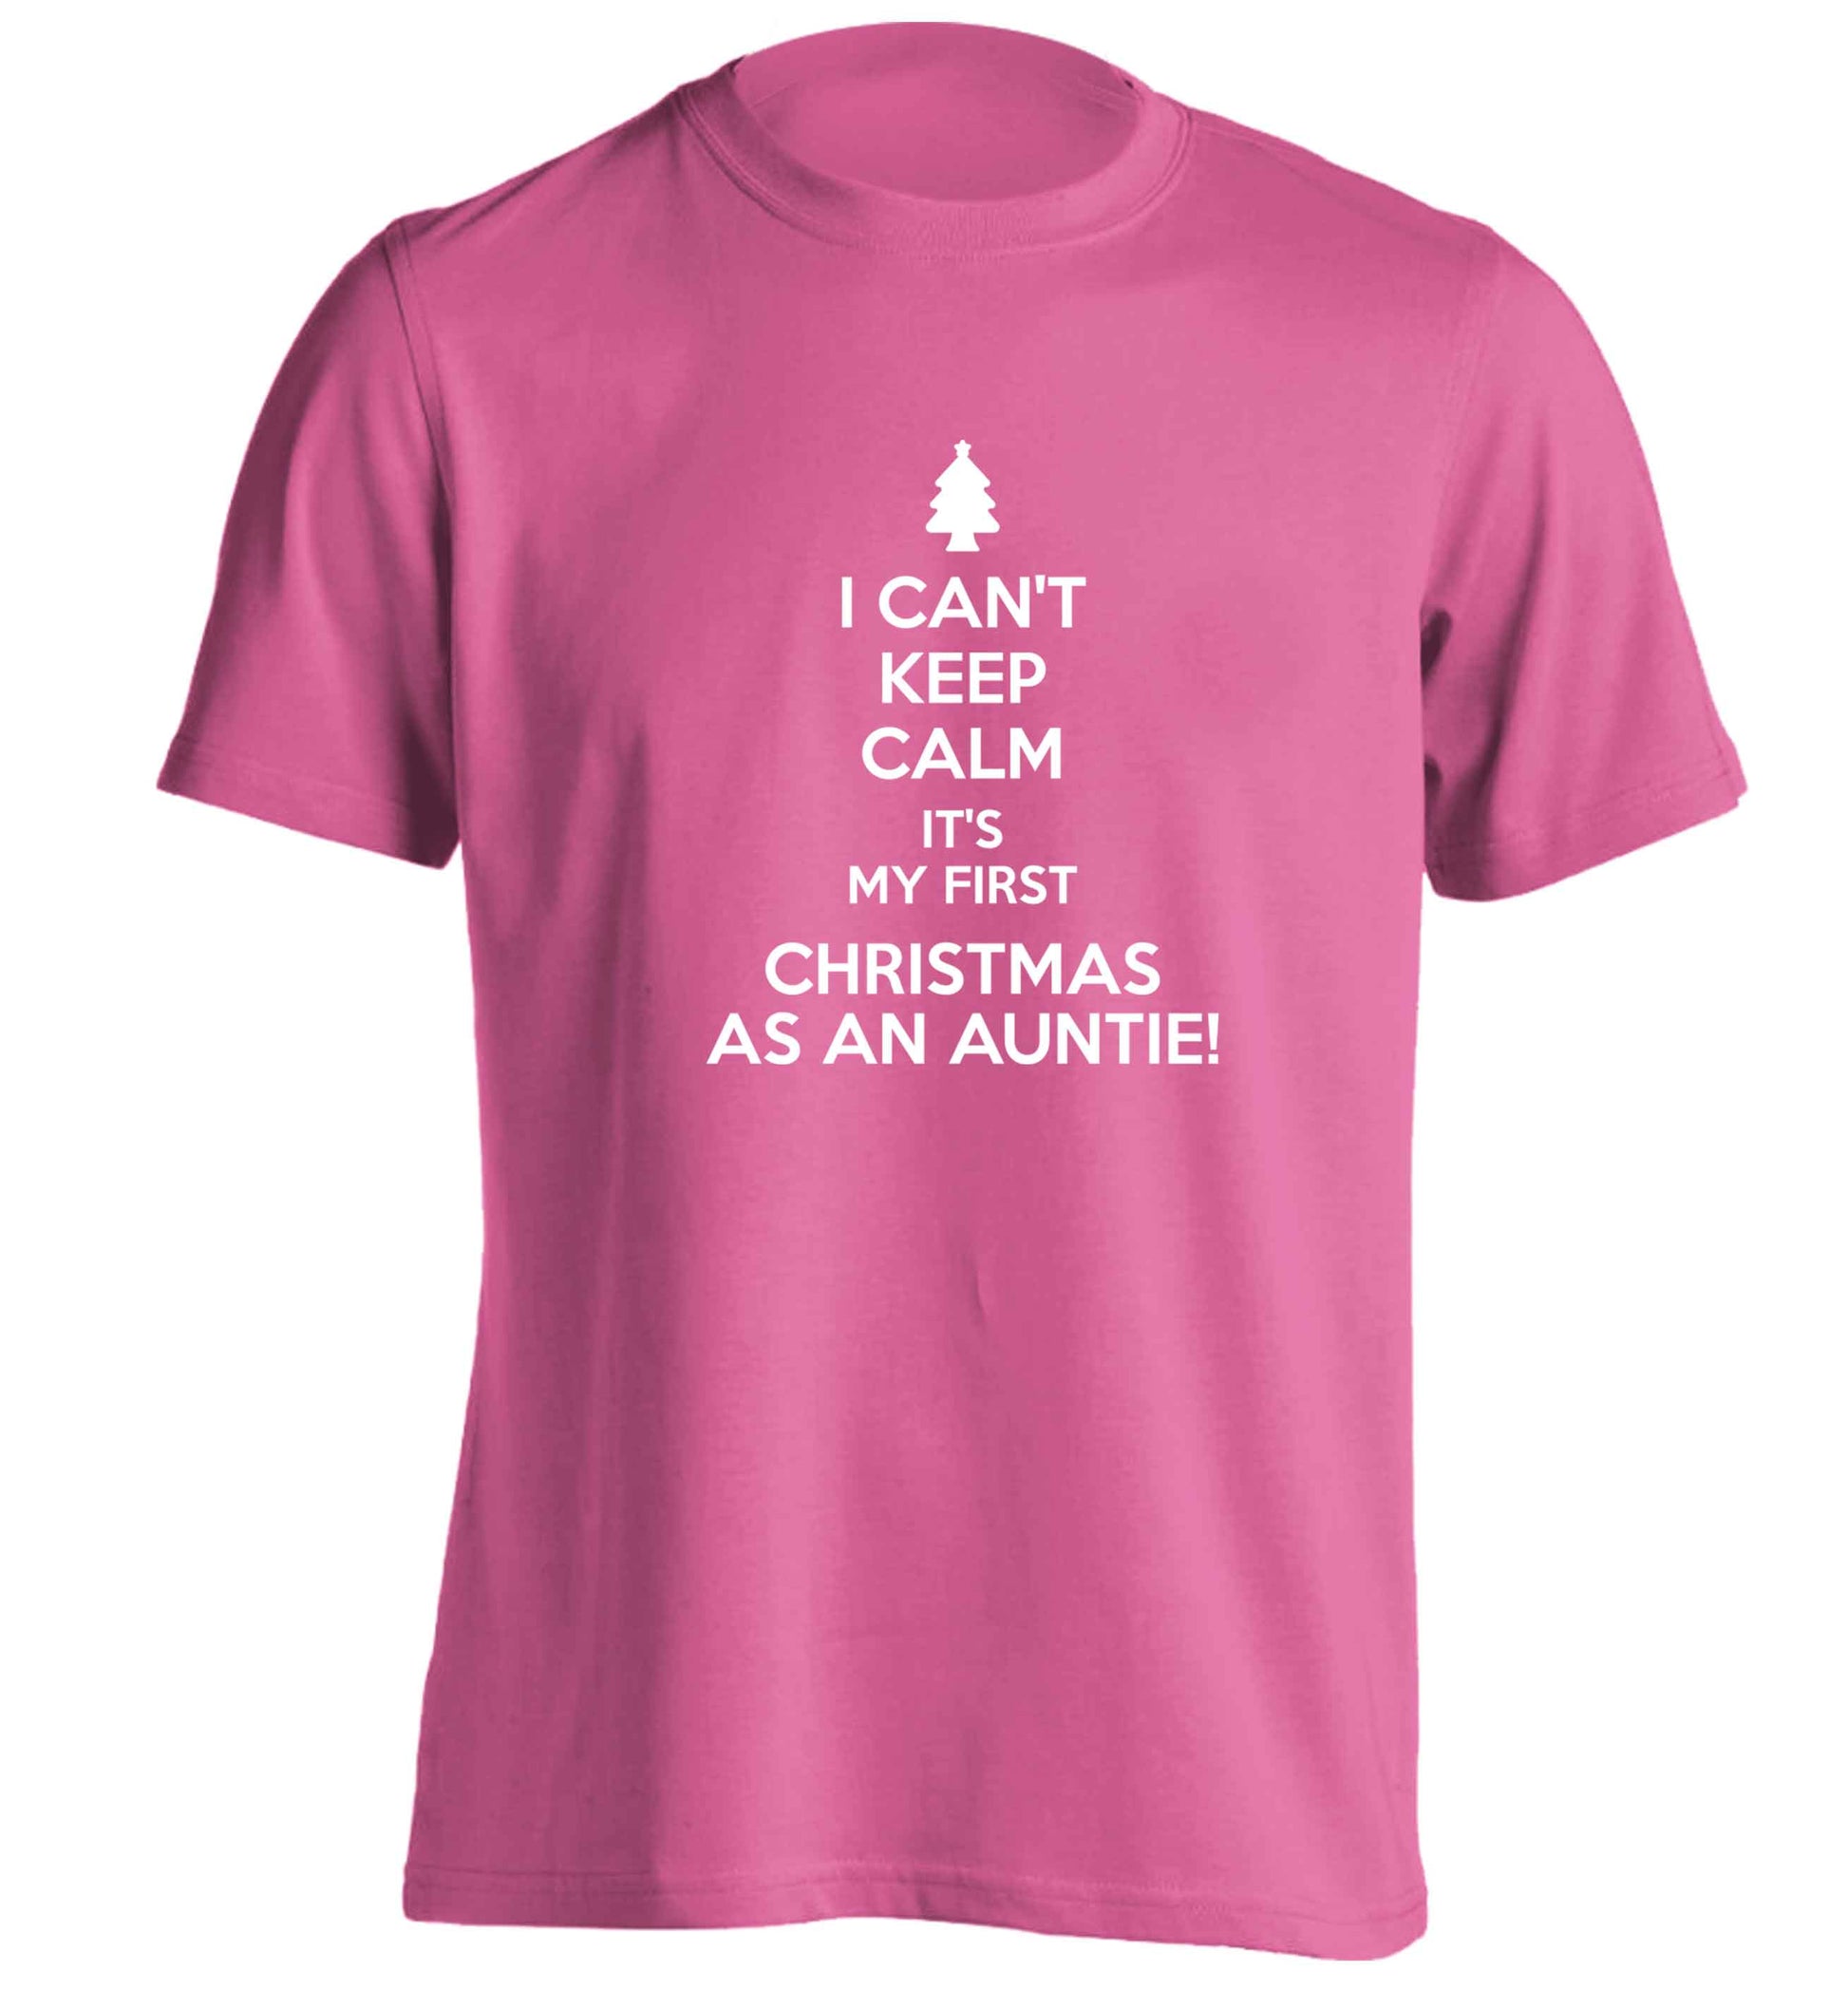 I can't keep calm it's my first Christmas as an auntie! adults unisex pink Tshirt 2XL